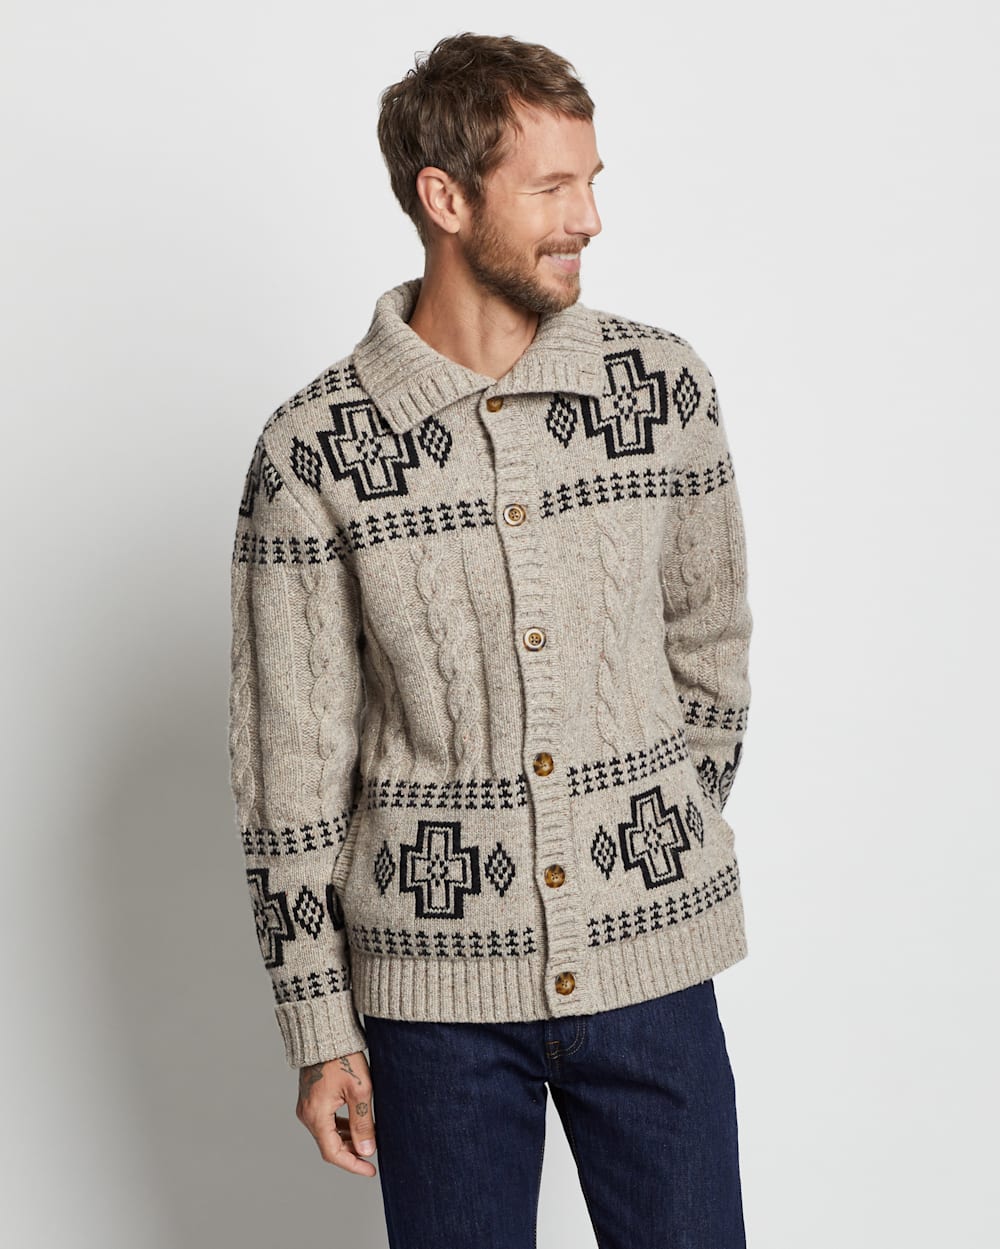 ALTERNATE VIEW OF MEN'S CABLE CROSS LAMBSWOOL CARDIGAN IN NATURAL DONEGAL image number 4